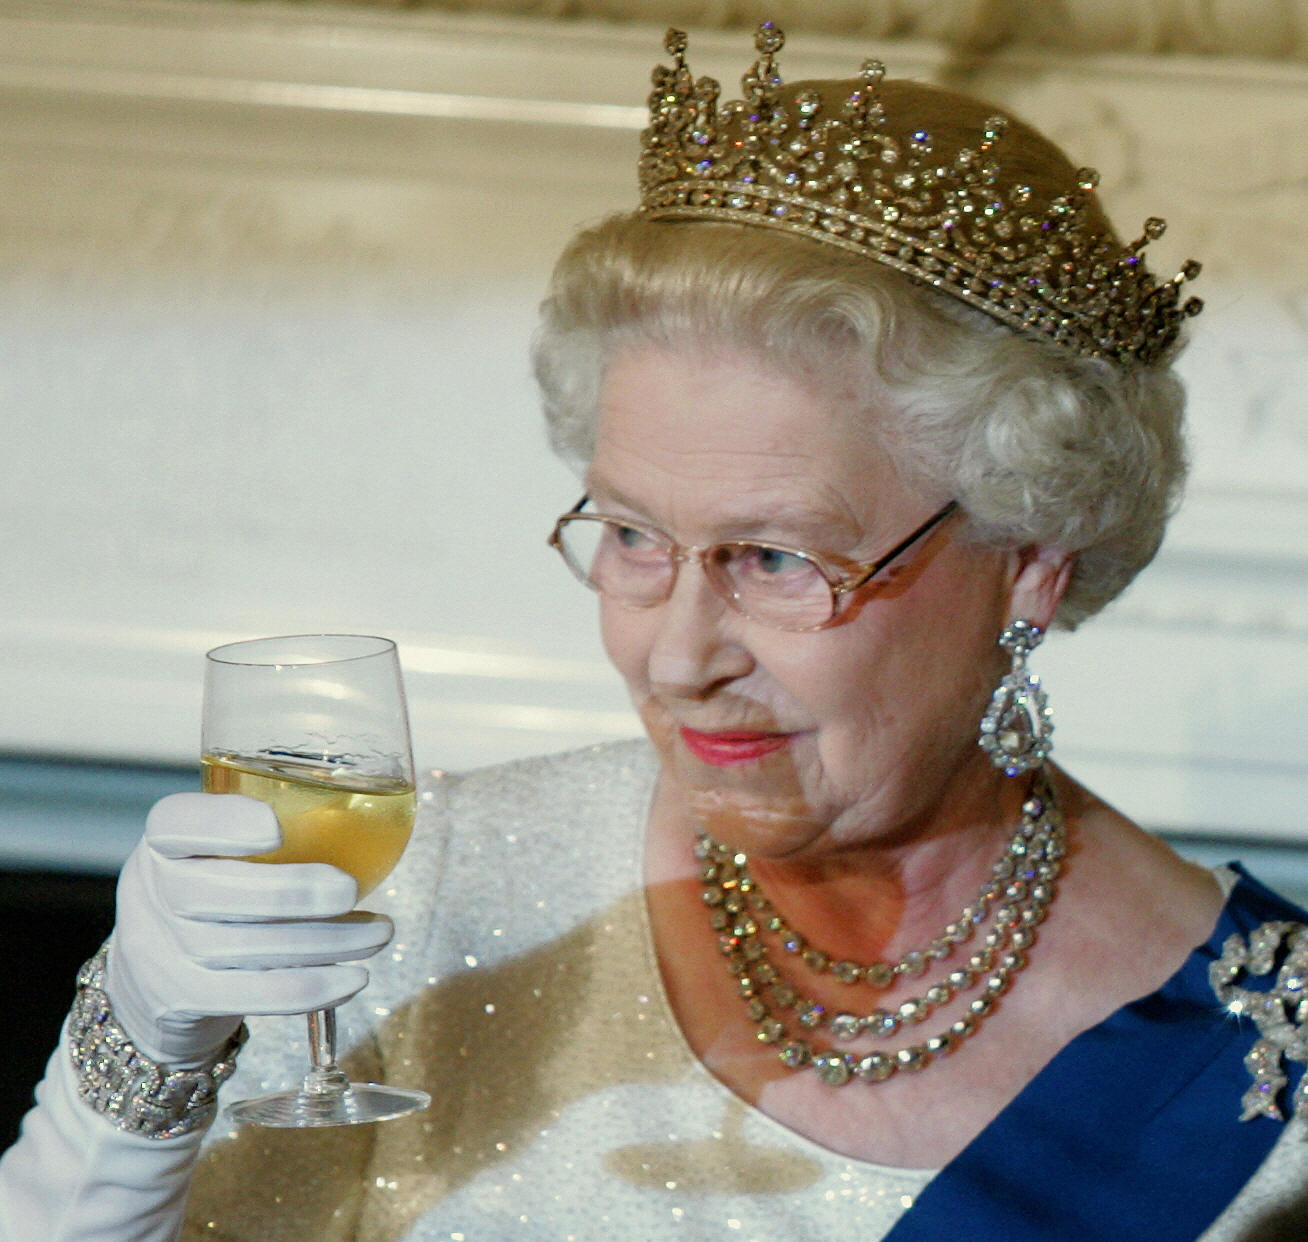 Queen Elizabeth II toasts US President George W. Bush after remarks at the start of a White House State Dinner for the British monarch and Prince Philip 07 May 2007 in Washington, DC. (Photo: SAUL LOEB/AFP/Getty Images)